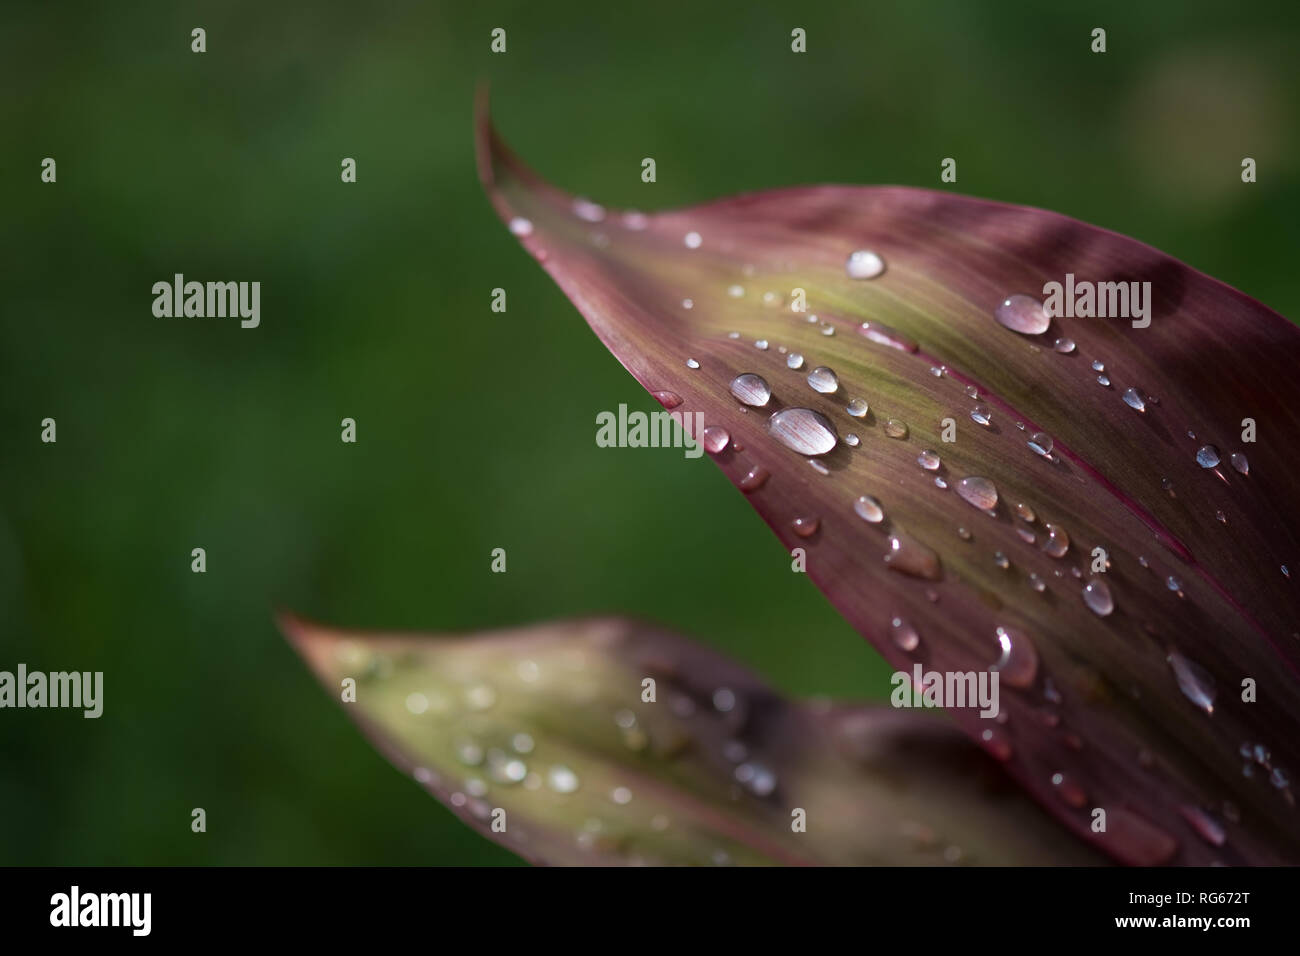 Close-up view of rain drops on leaf Stock Photo